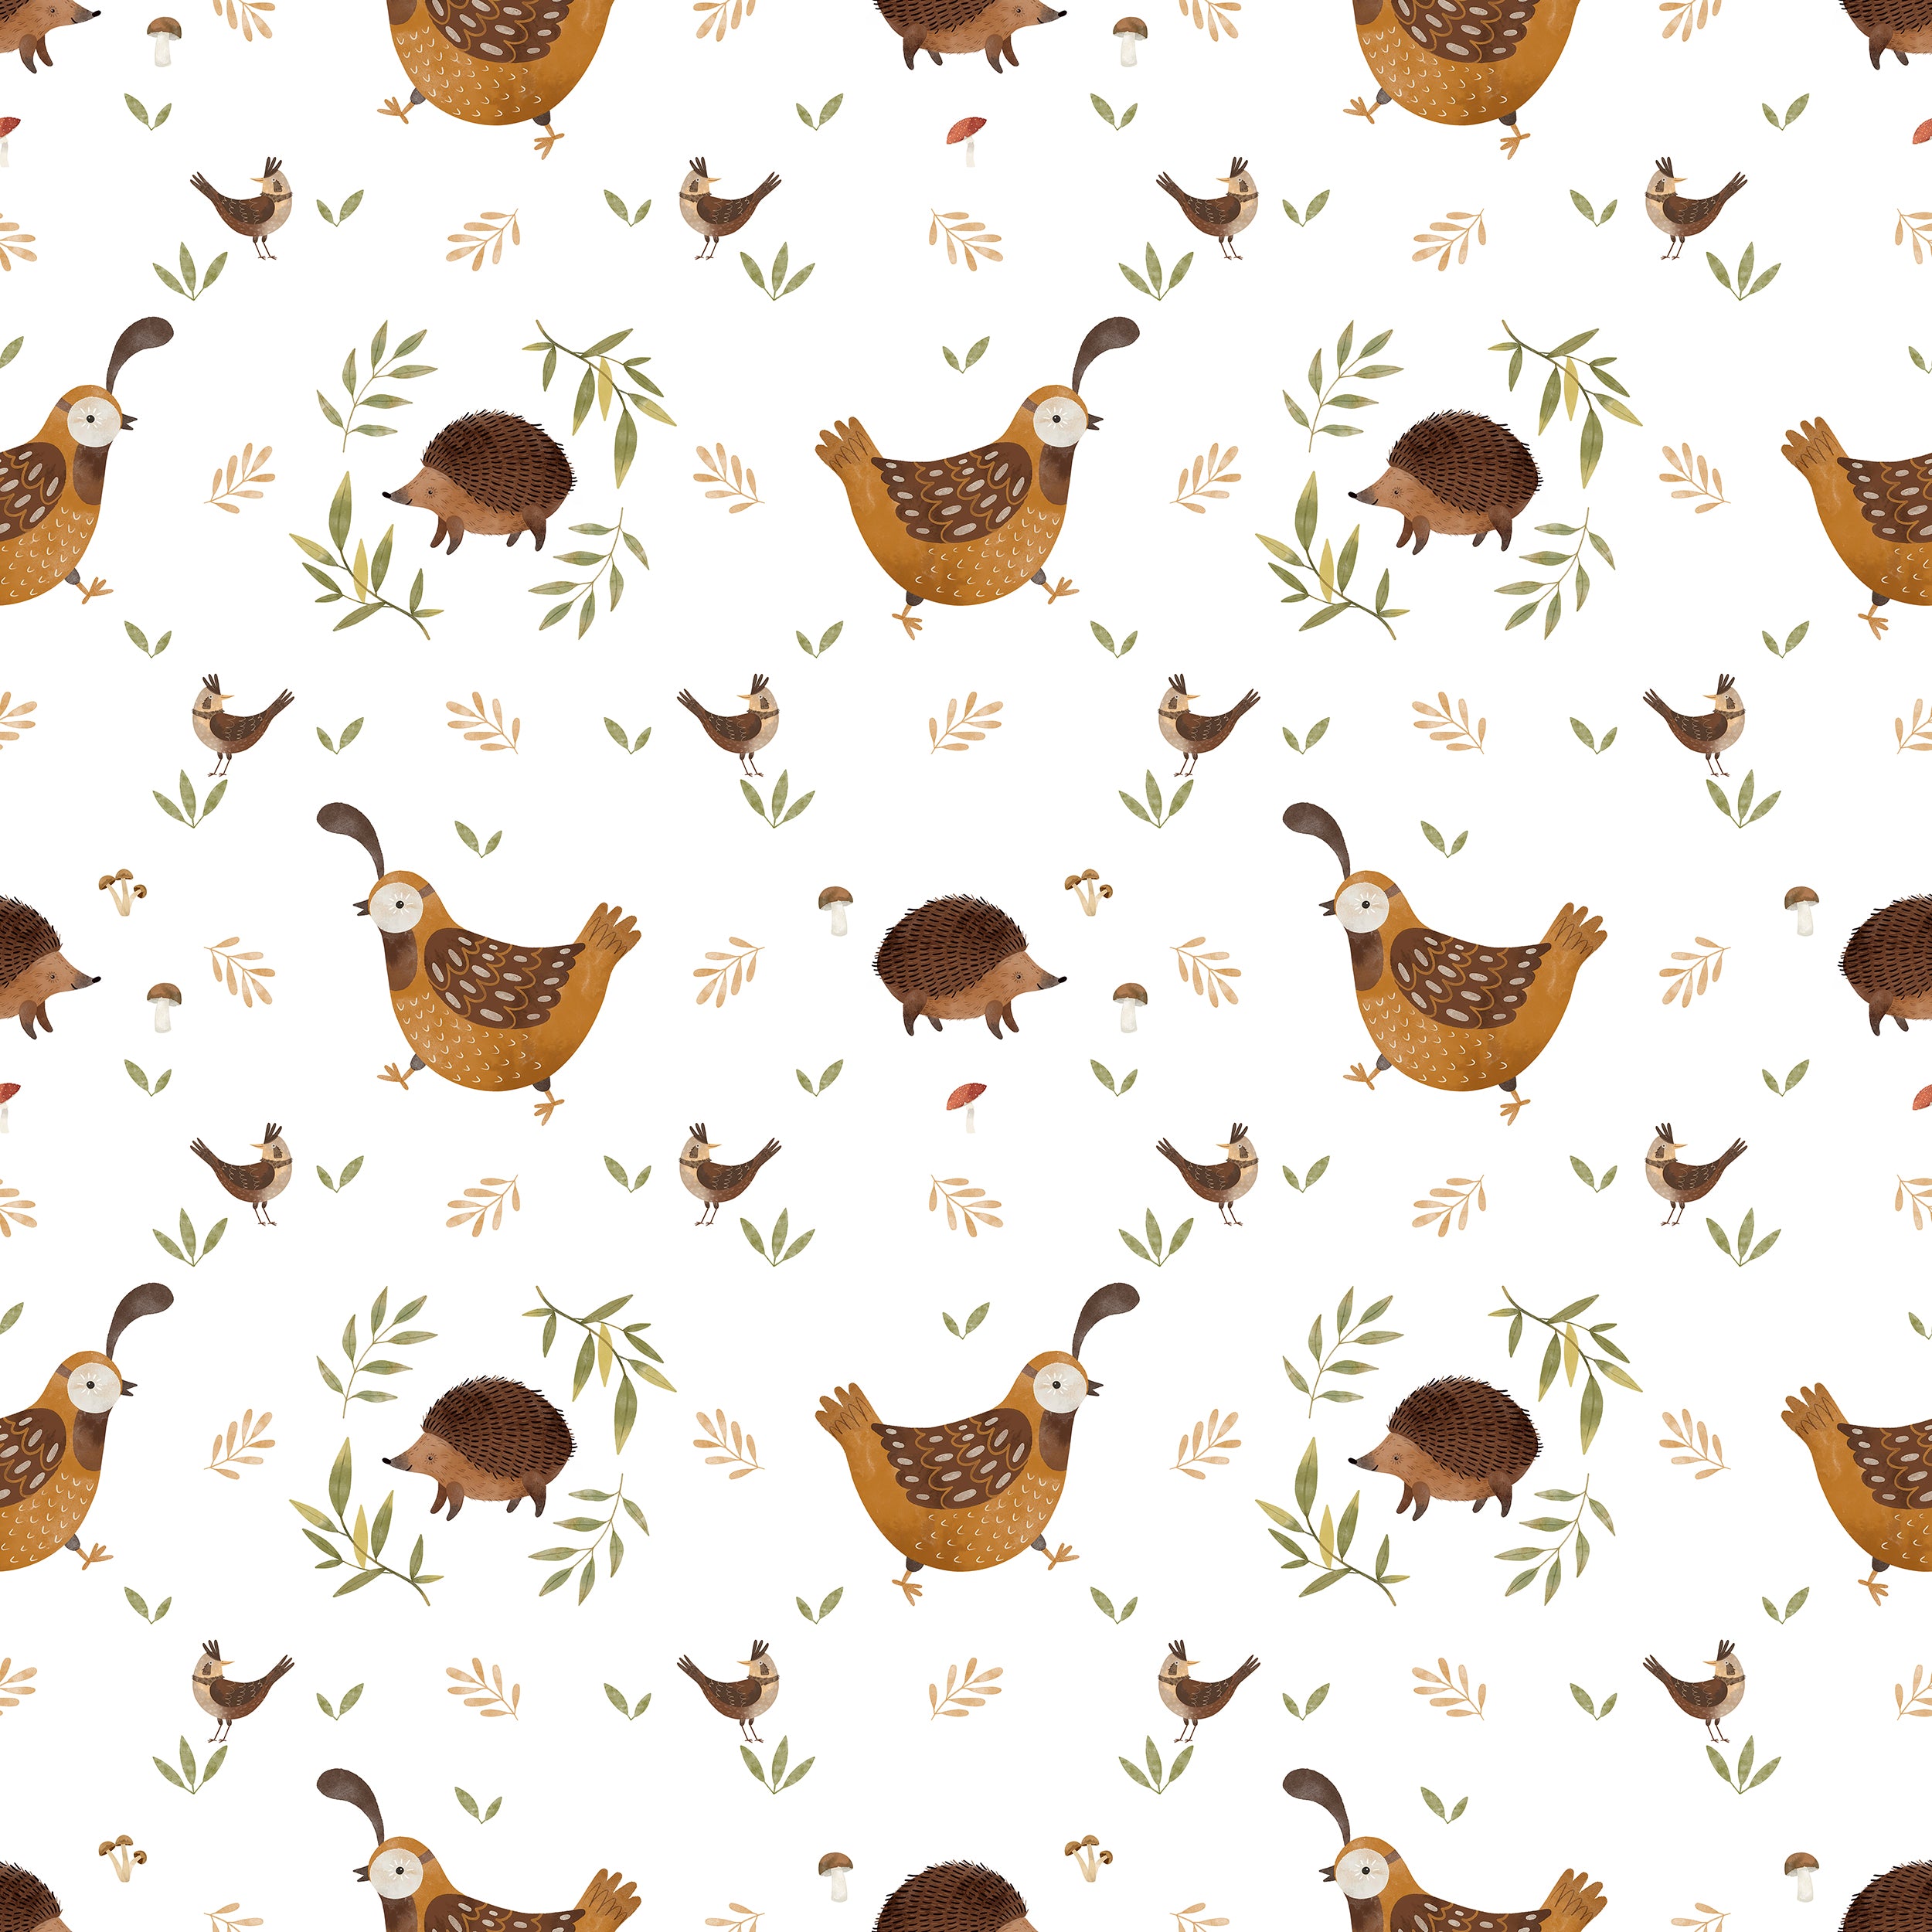 Close-up of Forest Hen Wallpaper featuring playful illustrations of brown hens, hedgehogs, and small birds amidst leaves and mushrooms on a white background, ideal for a natural and charming interior decor